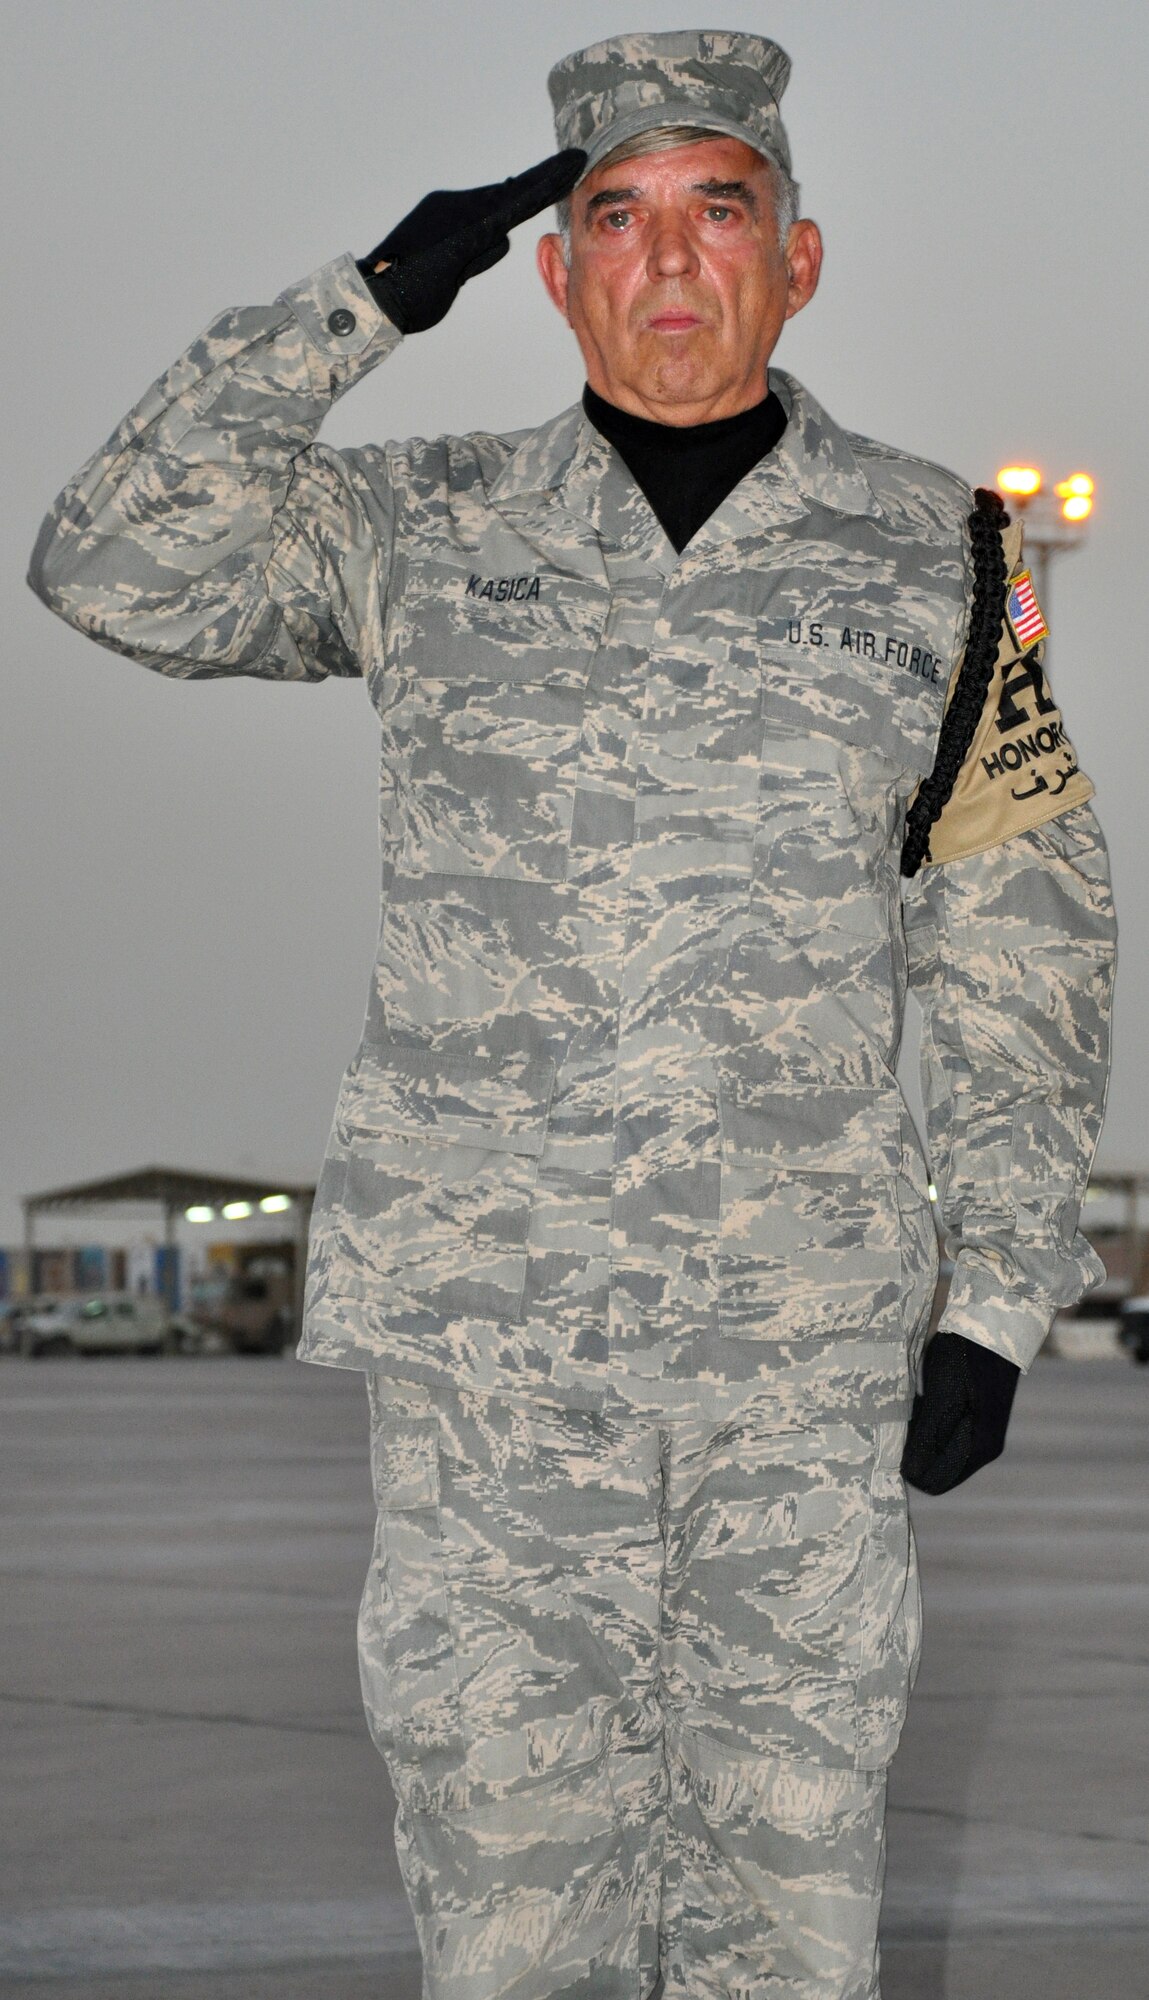 Senior Master Sgt. Paul Kasica, a member of the 447th Expeditionary Civil Engineering Squadron and the Base Honor Guard, salutes in honor of soldiers returning to Iraq as part of Operation Proper Exit.  Kasica, a New Jersey Air National Guardsman assigned to the 108th Air Refueling Wing, has been an Honor Guard volunteer for the past 19 years.  (U.S. Air Force photo by Tech. Sgt. Mike Edwards)